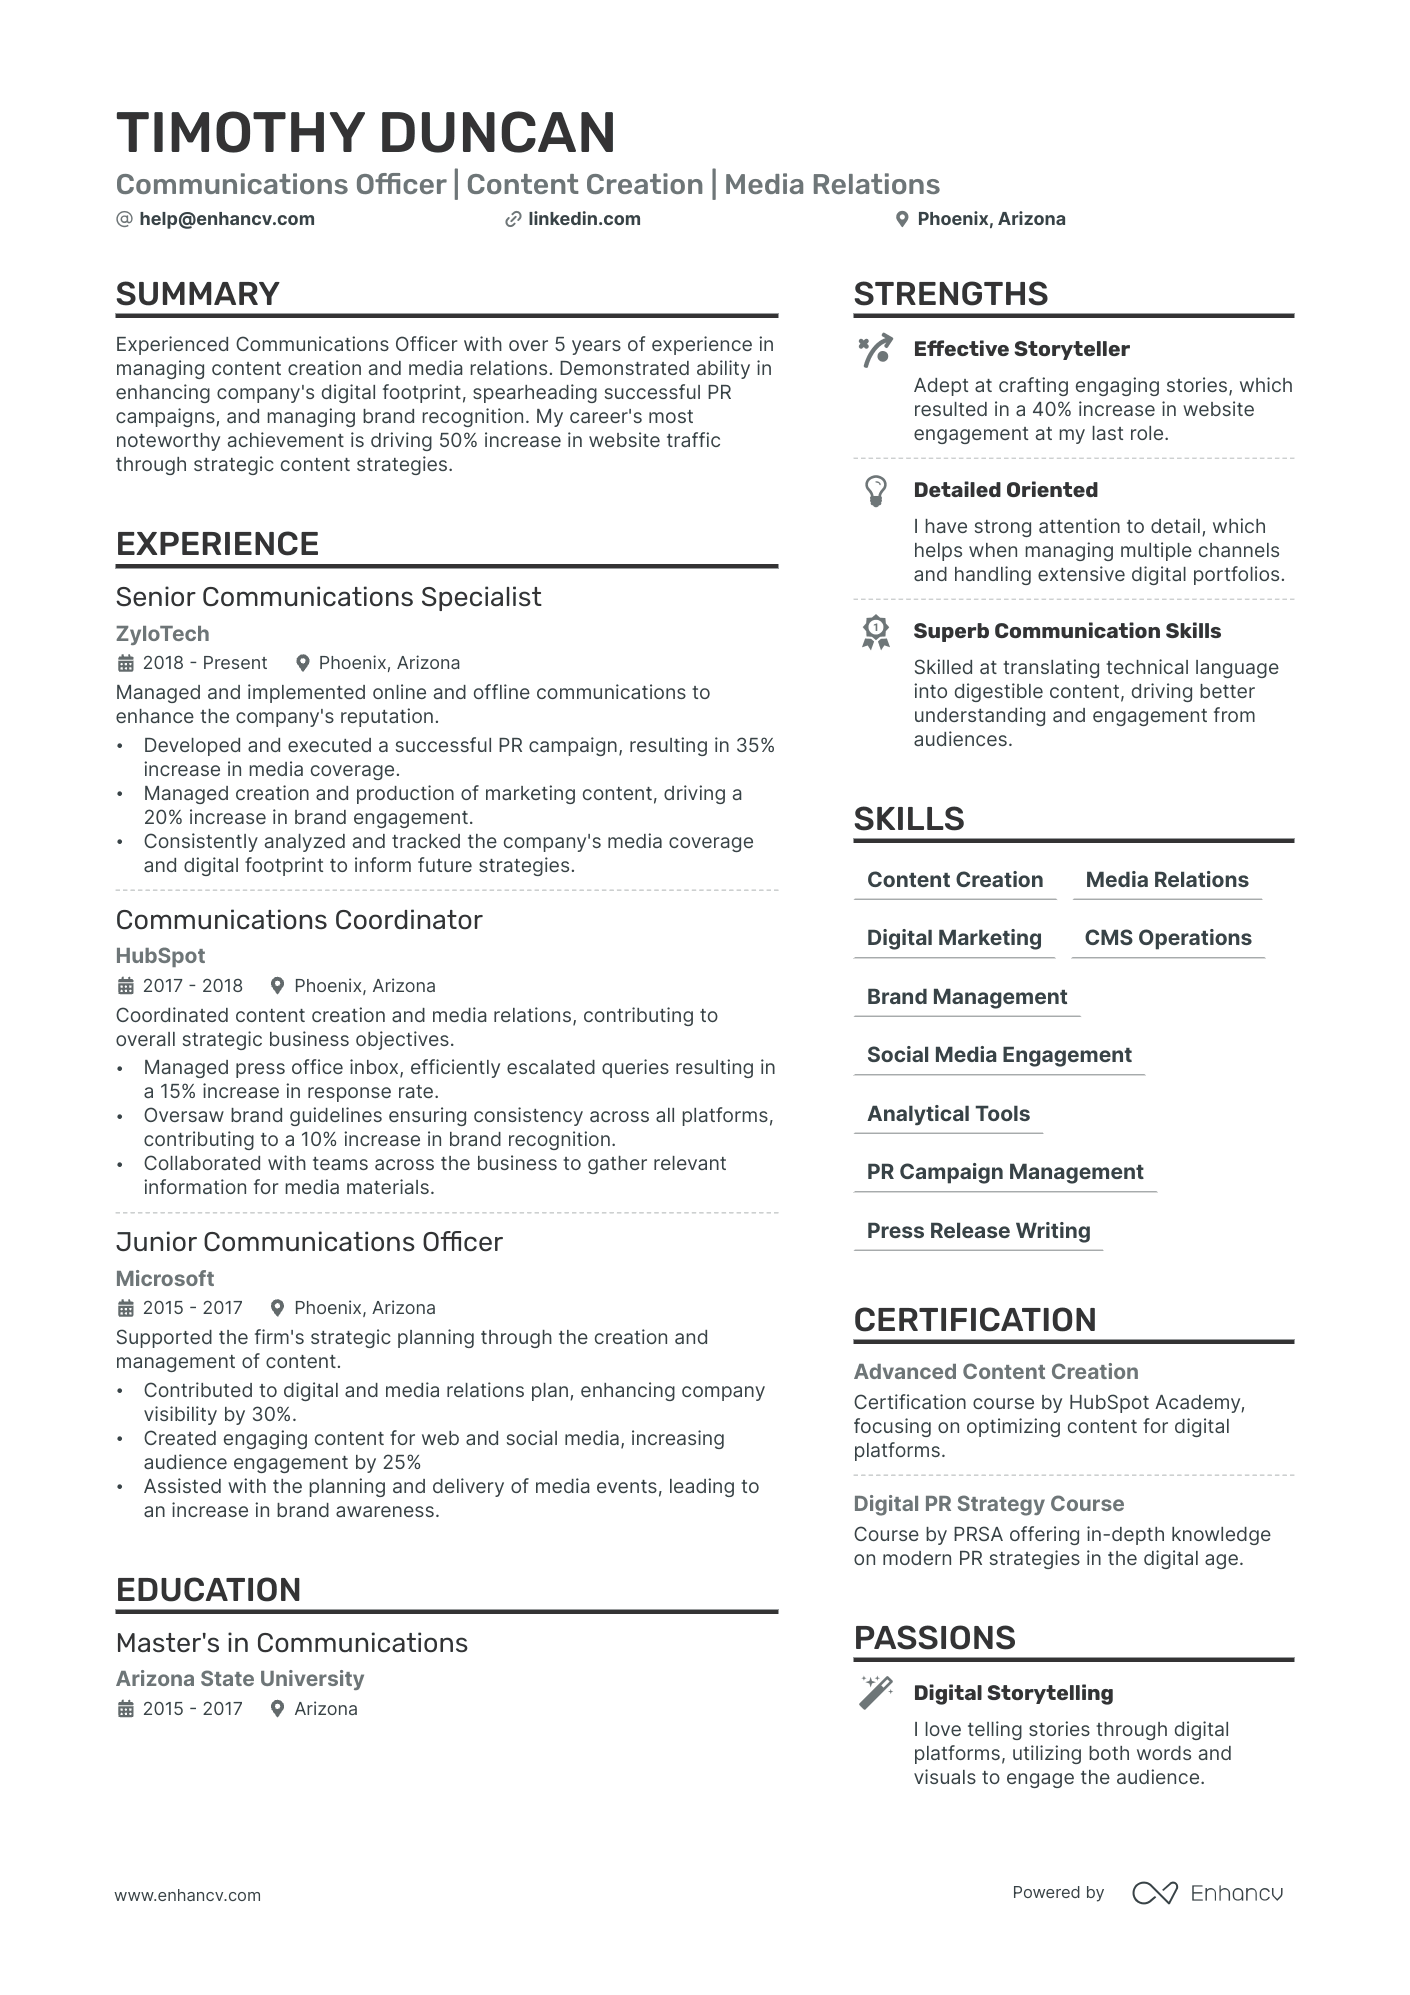 Communications Officer resume example